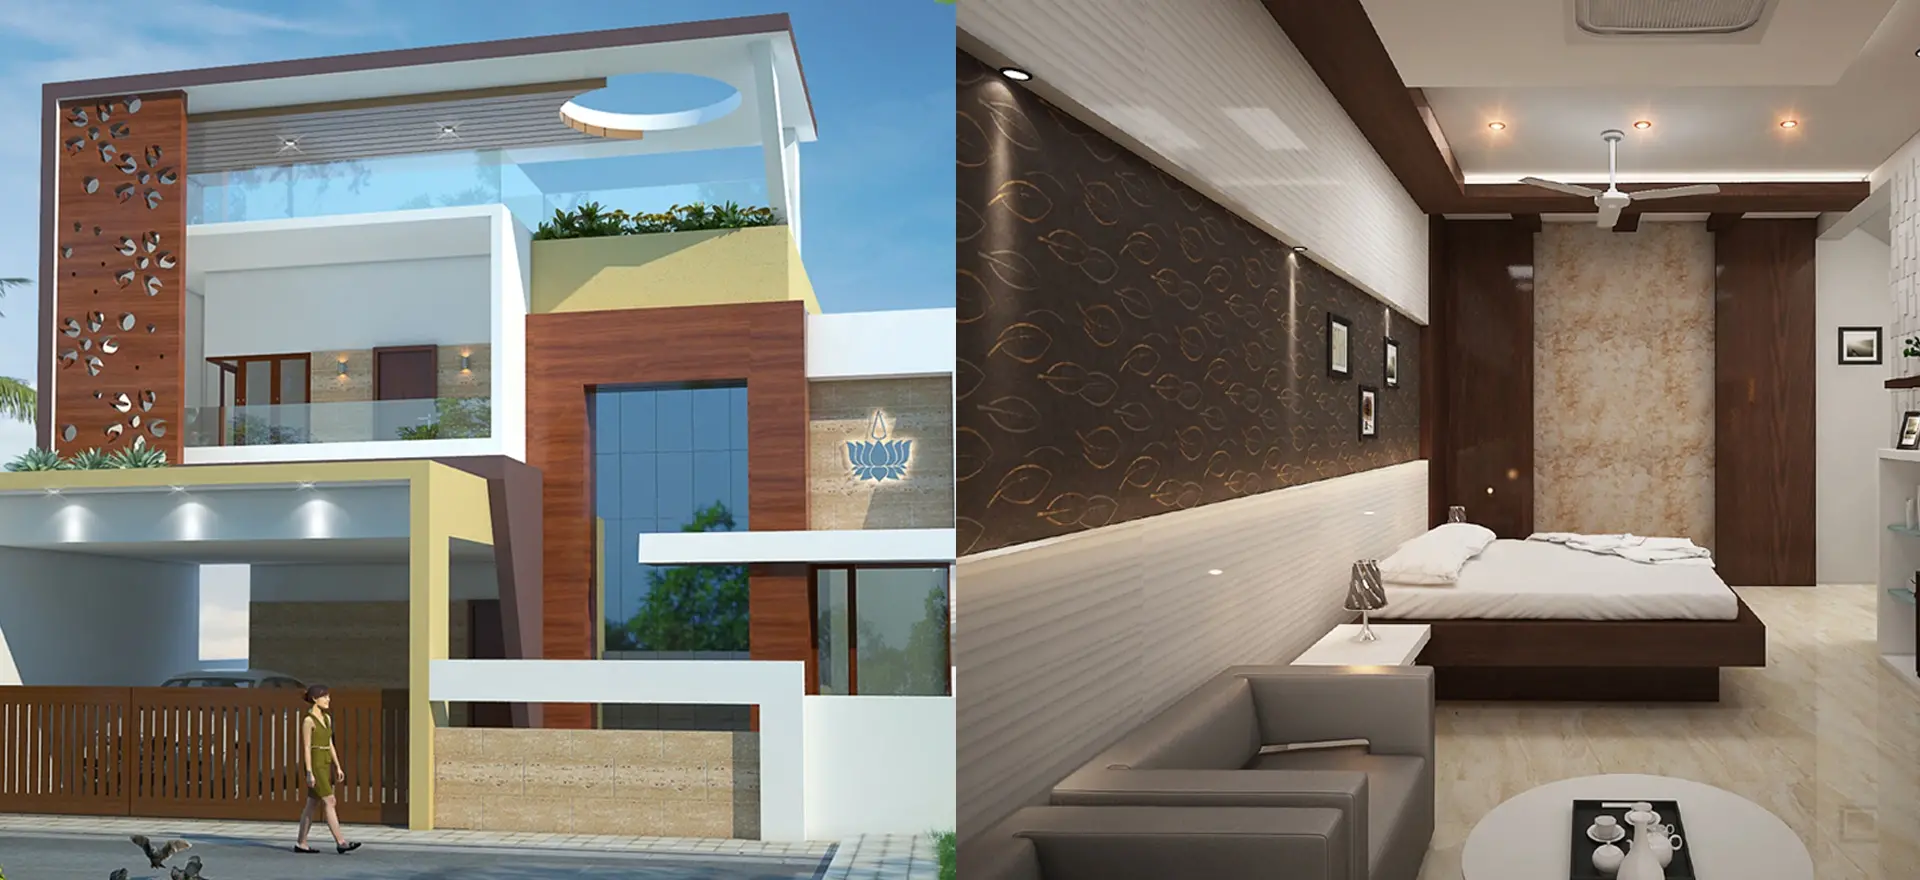 Anss Crafters Architects is the leading Architecture and Interior Design Studio in Tirunelveli, India. A globally connected design firm working with International clients from across the world.